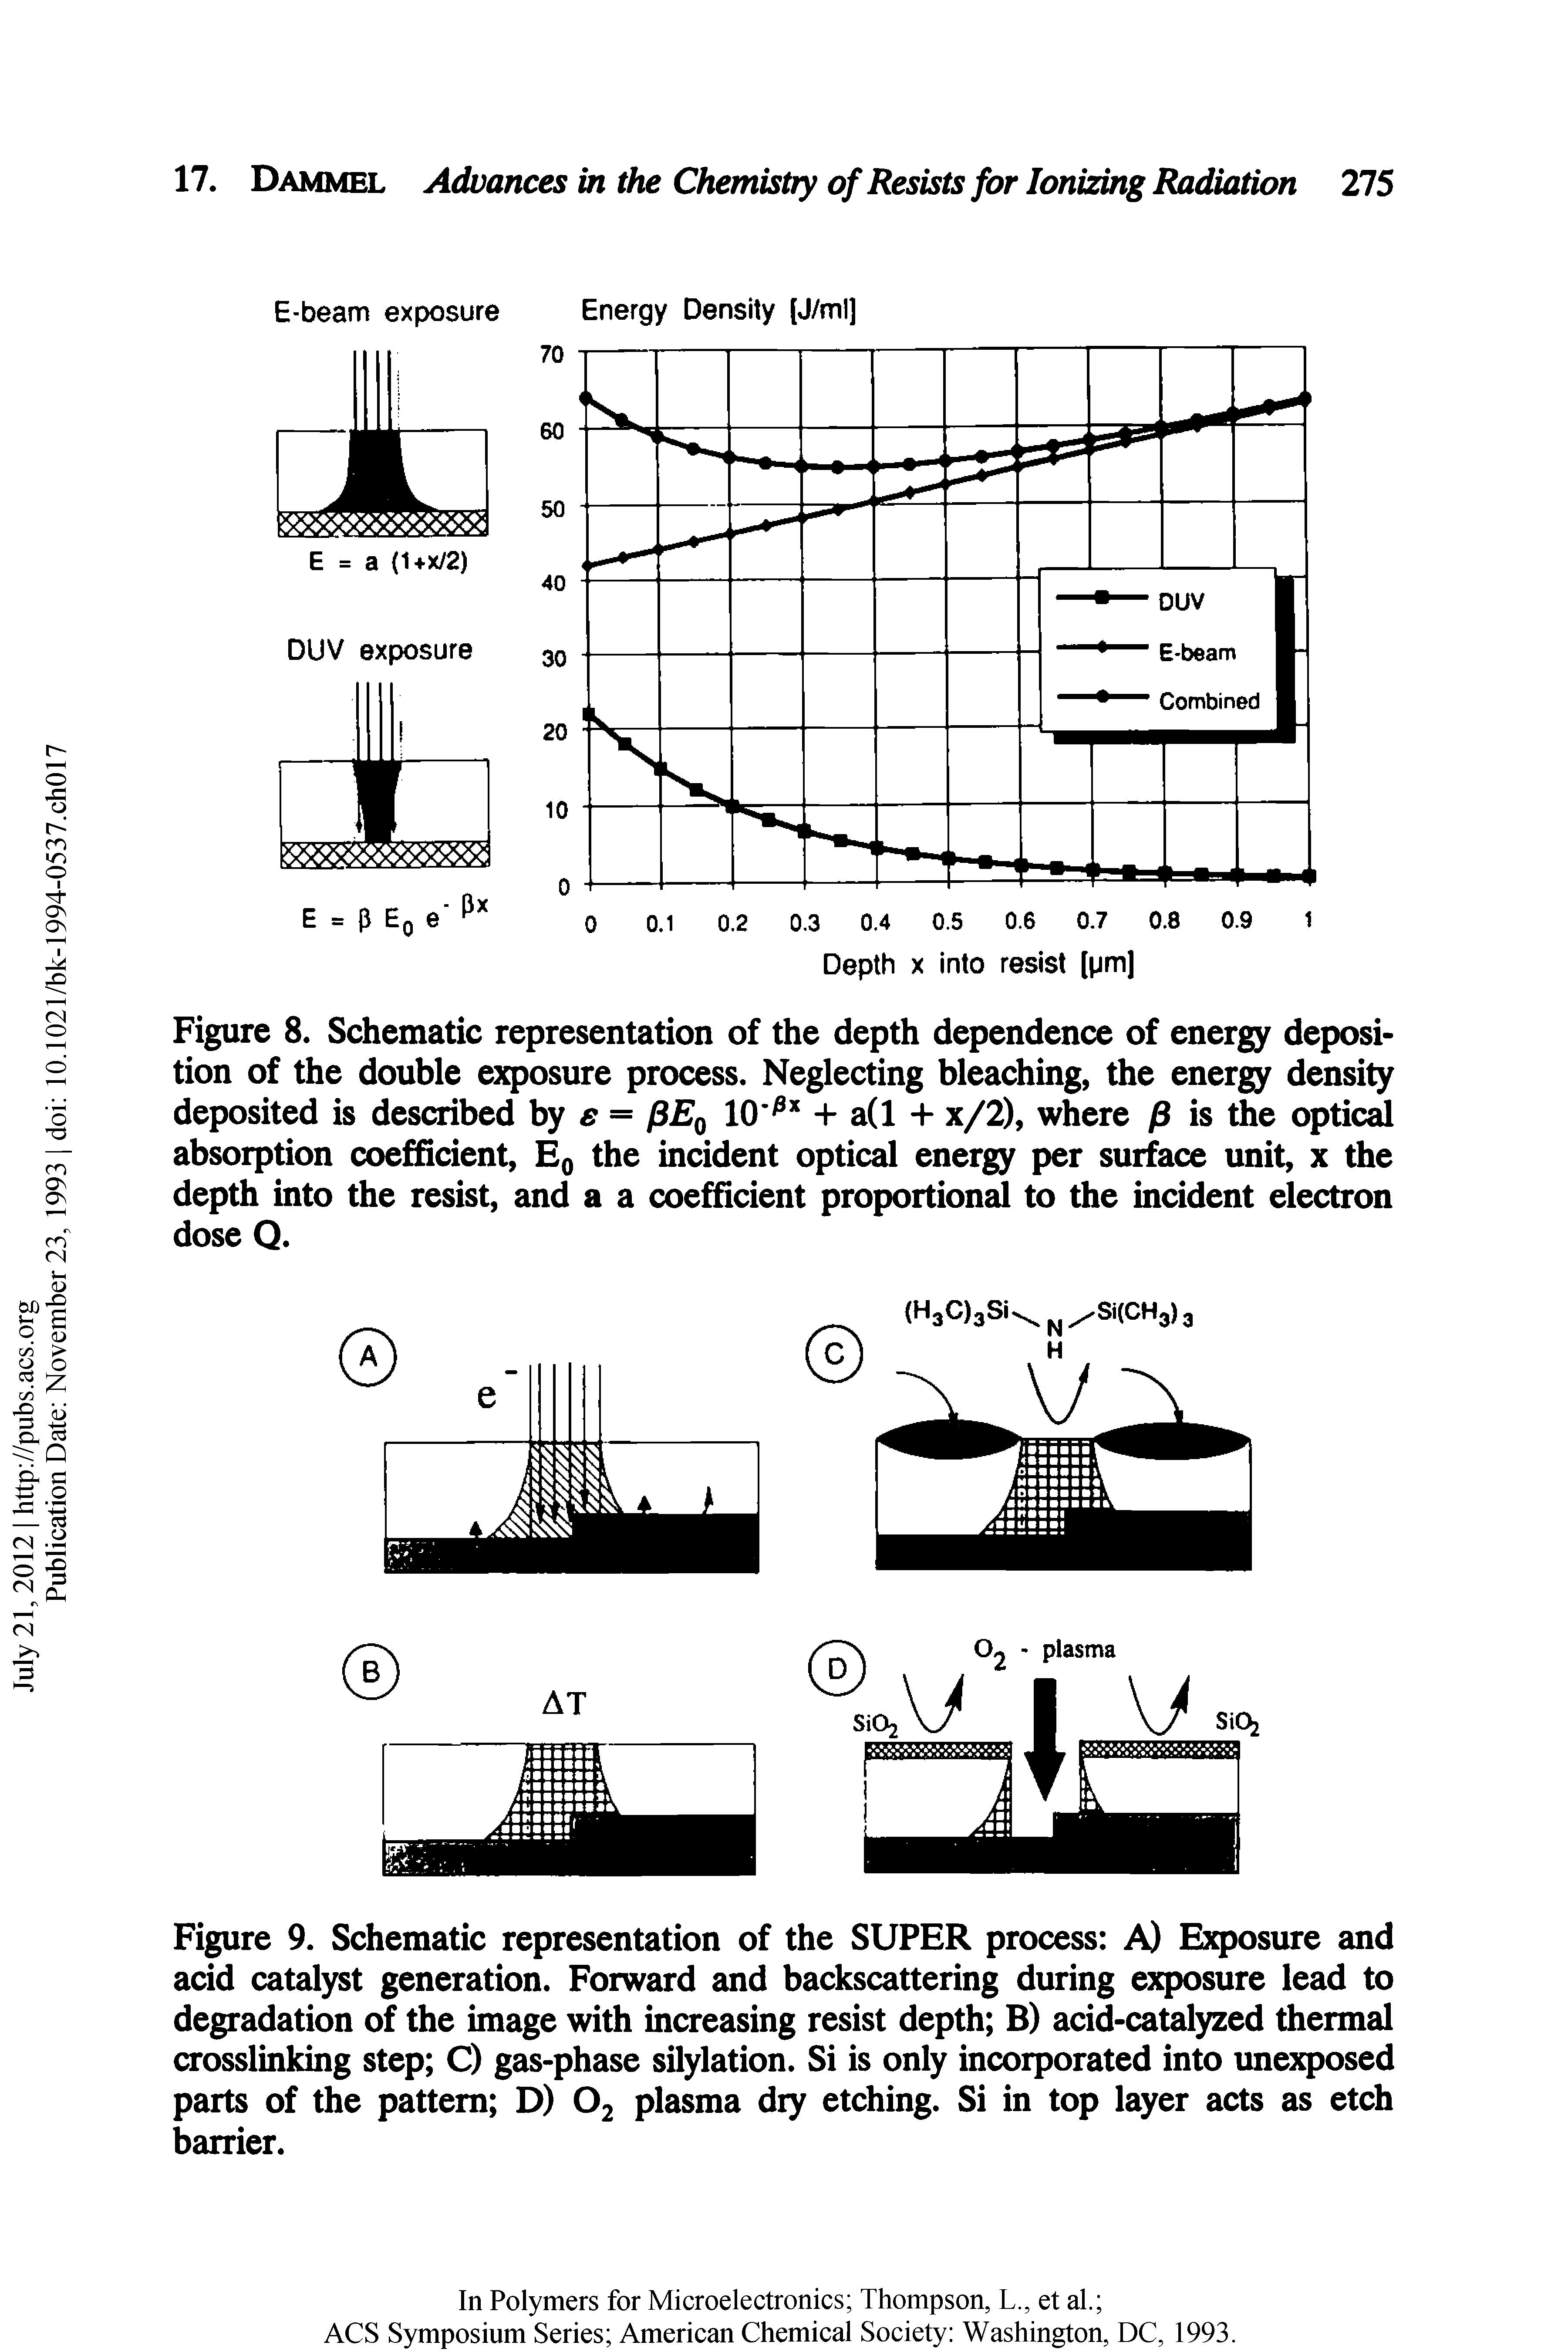 Figure 8. Schematic representation of the depth dependence of energy deposition of the double exposure process. Neglecting bleaching, the energy density deposited is described by = pEg 10 + a(l + x/2), where p is the optical absorption coefficient, Eg the incident optical energy per surface unit, x the depth into the resist, and a a coefficient proportional to the incident electron dose Q.